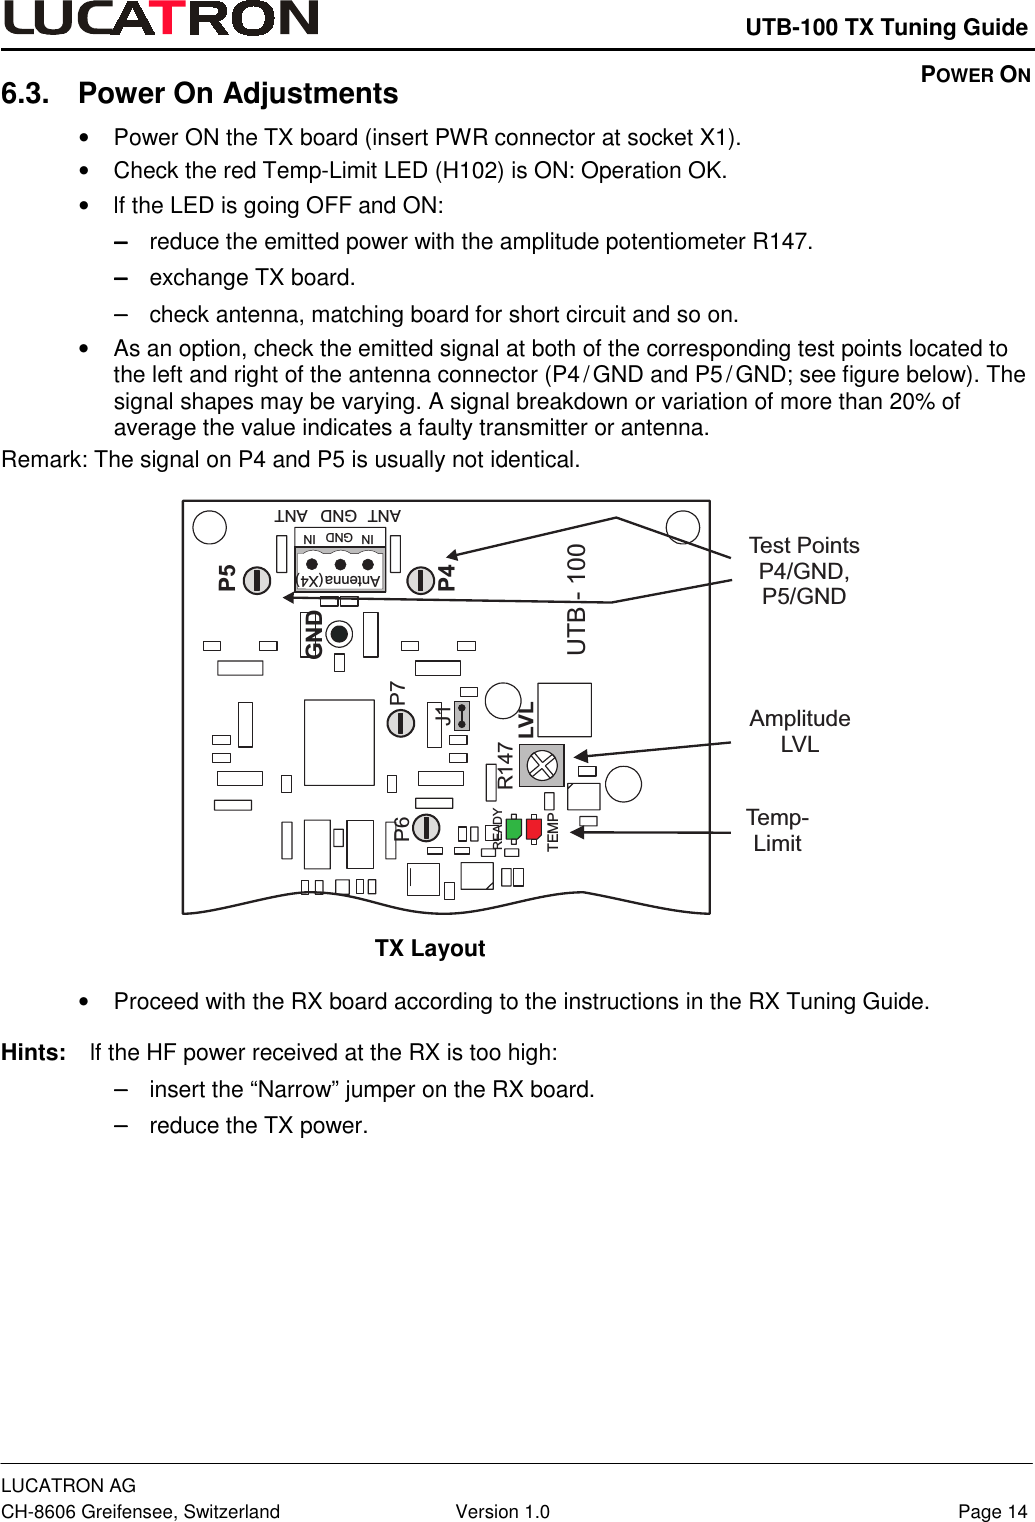    UTB-100 TX Tuning Guide LUCATRON AG CH-8606 Greifensee, Switzerland  Version 1.0  Page 14 6.3. Power On Adjustments  •  Power ON the TX board (insert PWR connector at socket X1).  •  Check the red Temp-Limit LED (H102) is ON: Operation OK.  •  lf the LED is going OFF and ON:  −−−−    reduce the emitted power with the amplitude potentiometer R147. −−−−    exchange TX board.  −−−−    check antenna, matching board for short circuit and so on.  •  As an option, check the emitted signal at both of the corresponding test points located to the left and right of the antenna connector (P4 / GND and P5 / GND; see figure below). The signal shapes may be varying. A signal breakdown or variation of more than 20% of average the value indicates a faulty transmitter or antenna.  Remark: The signal on P4 and P5 is usually not identical.  AmplitudeLVLP6 P7GNDP5P4R147LVLJ1IN GND INAntenna(X4)ANTANT GNDTEMPREADYUTB - 100Test PointsP4/GND,P5/GNDTemp-Limit TX Layout •  Proceed with the RX board according to the instructions in the RX Tuning Guide.  Hints:    lf the HF power received at the RX is too high: −−−−    insert the “Narrow” jumper on the RX board. −−−−    reduce the TX power.  POWER ON 